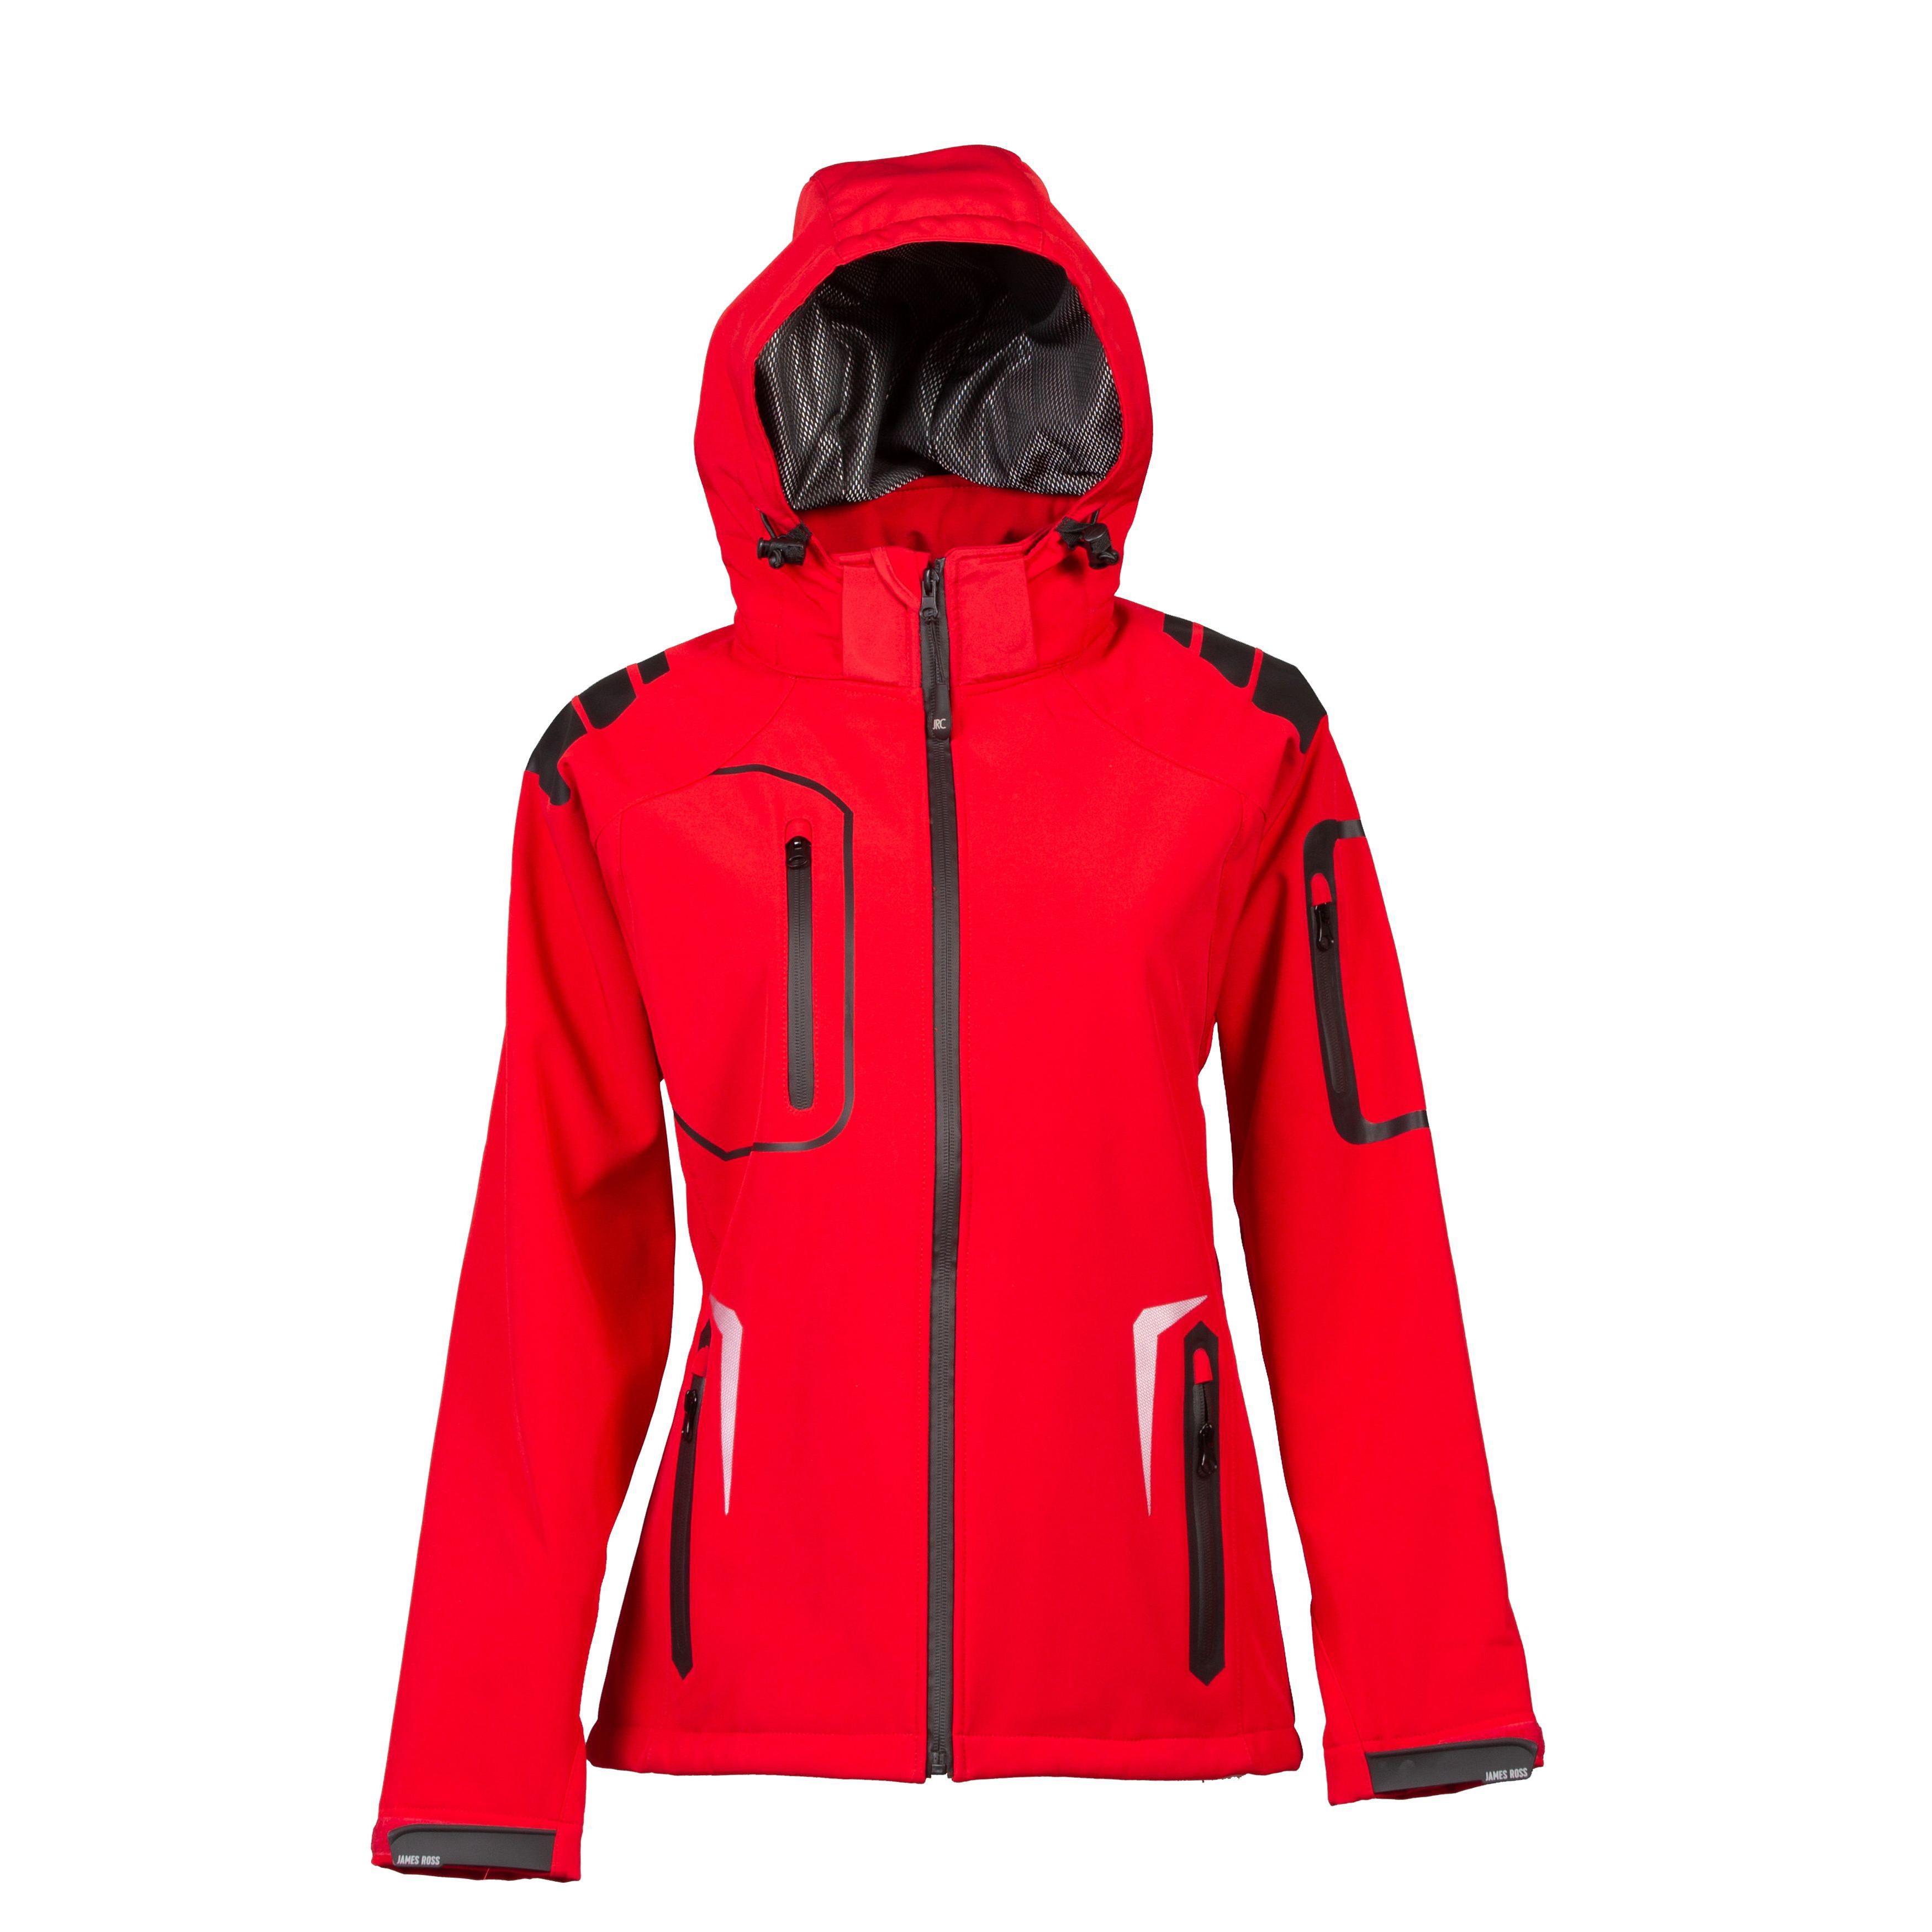 Giubbotto James Ross Artic Lady New Softshell Impermeabile